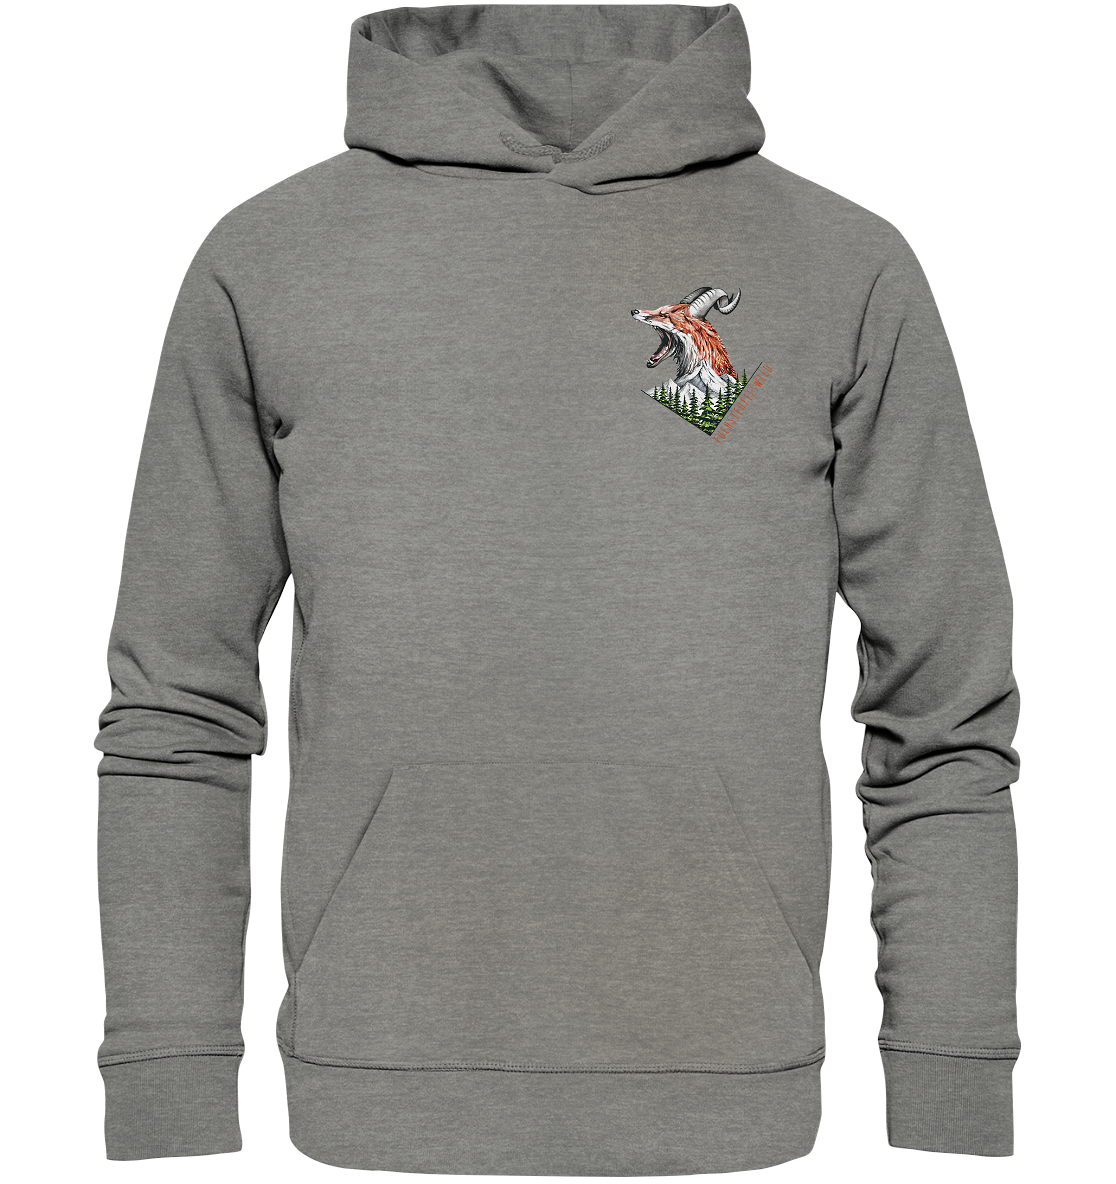 front-organic-hoodie-818381-1116x-1.png